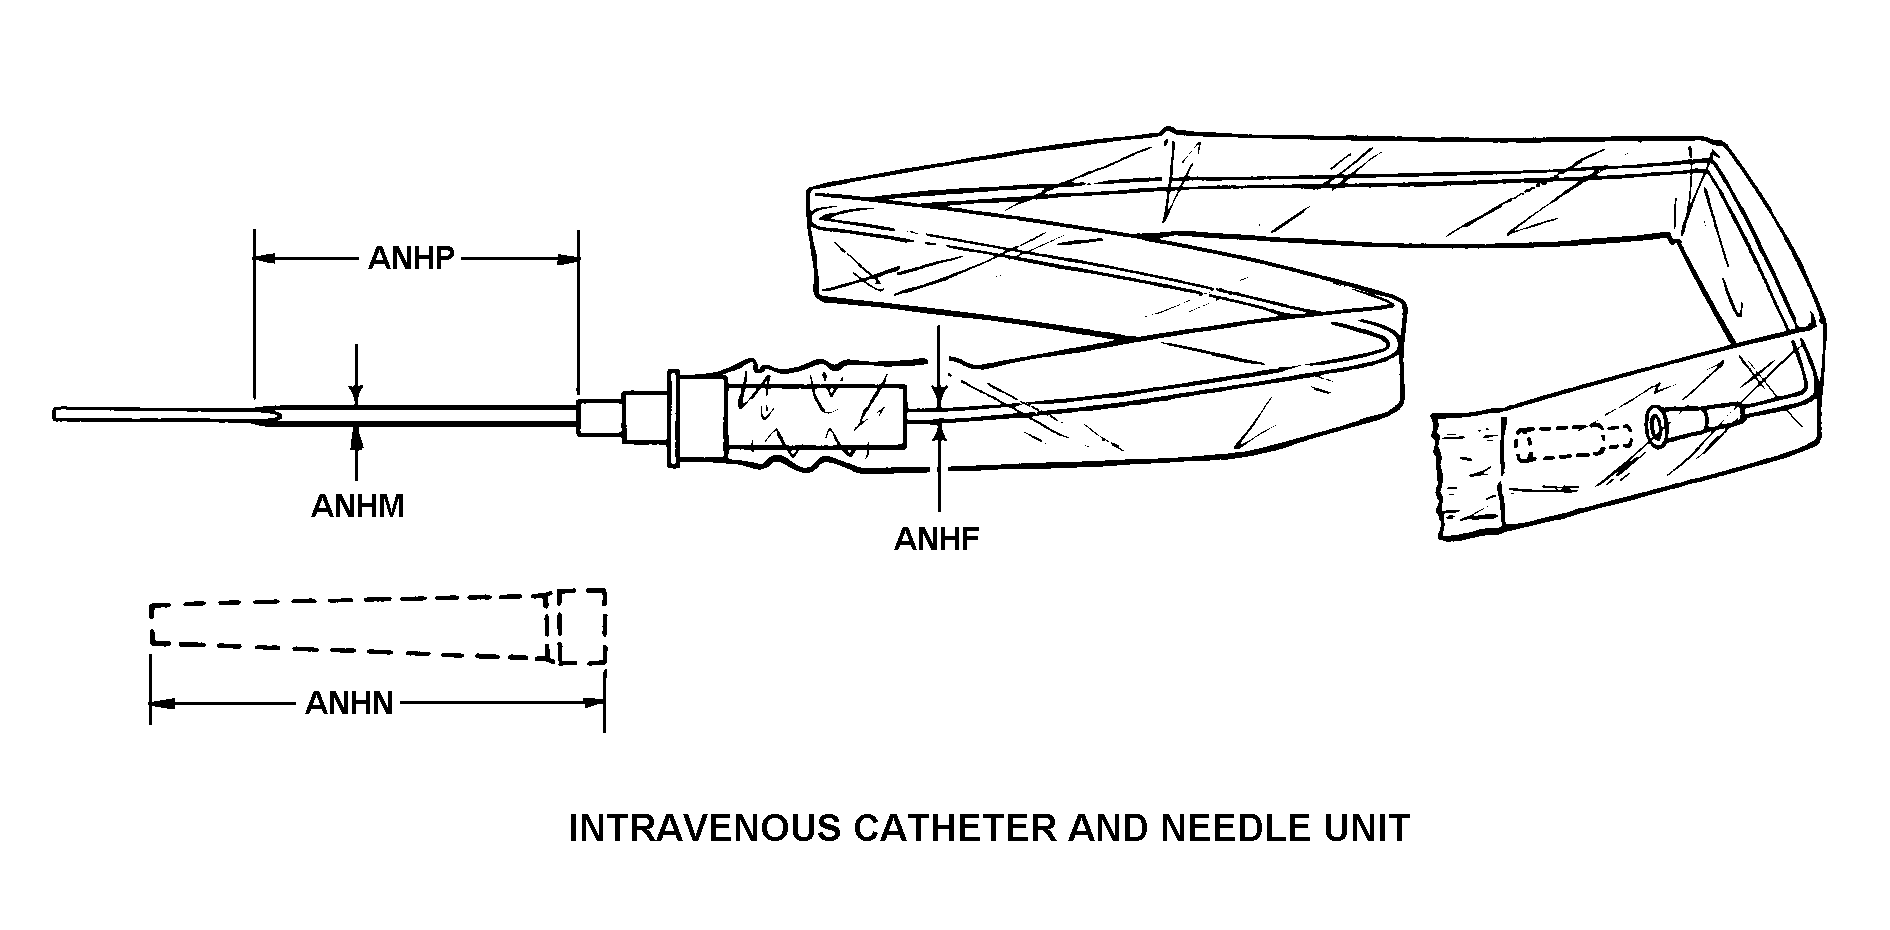 INTRAVENOUS CATHETER AND NEEDLE UNIT style nsn 6515-01-209-5691